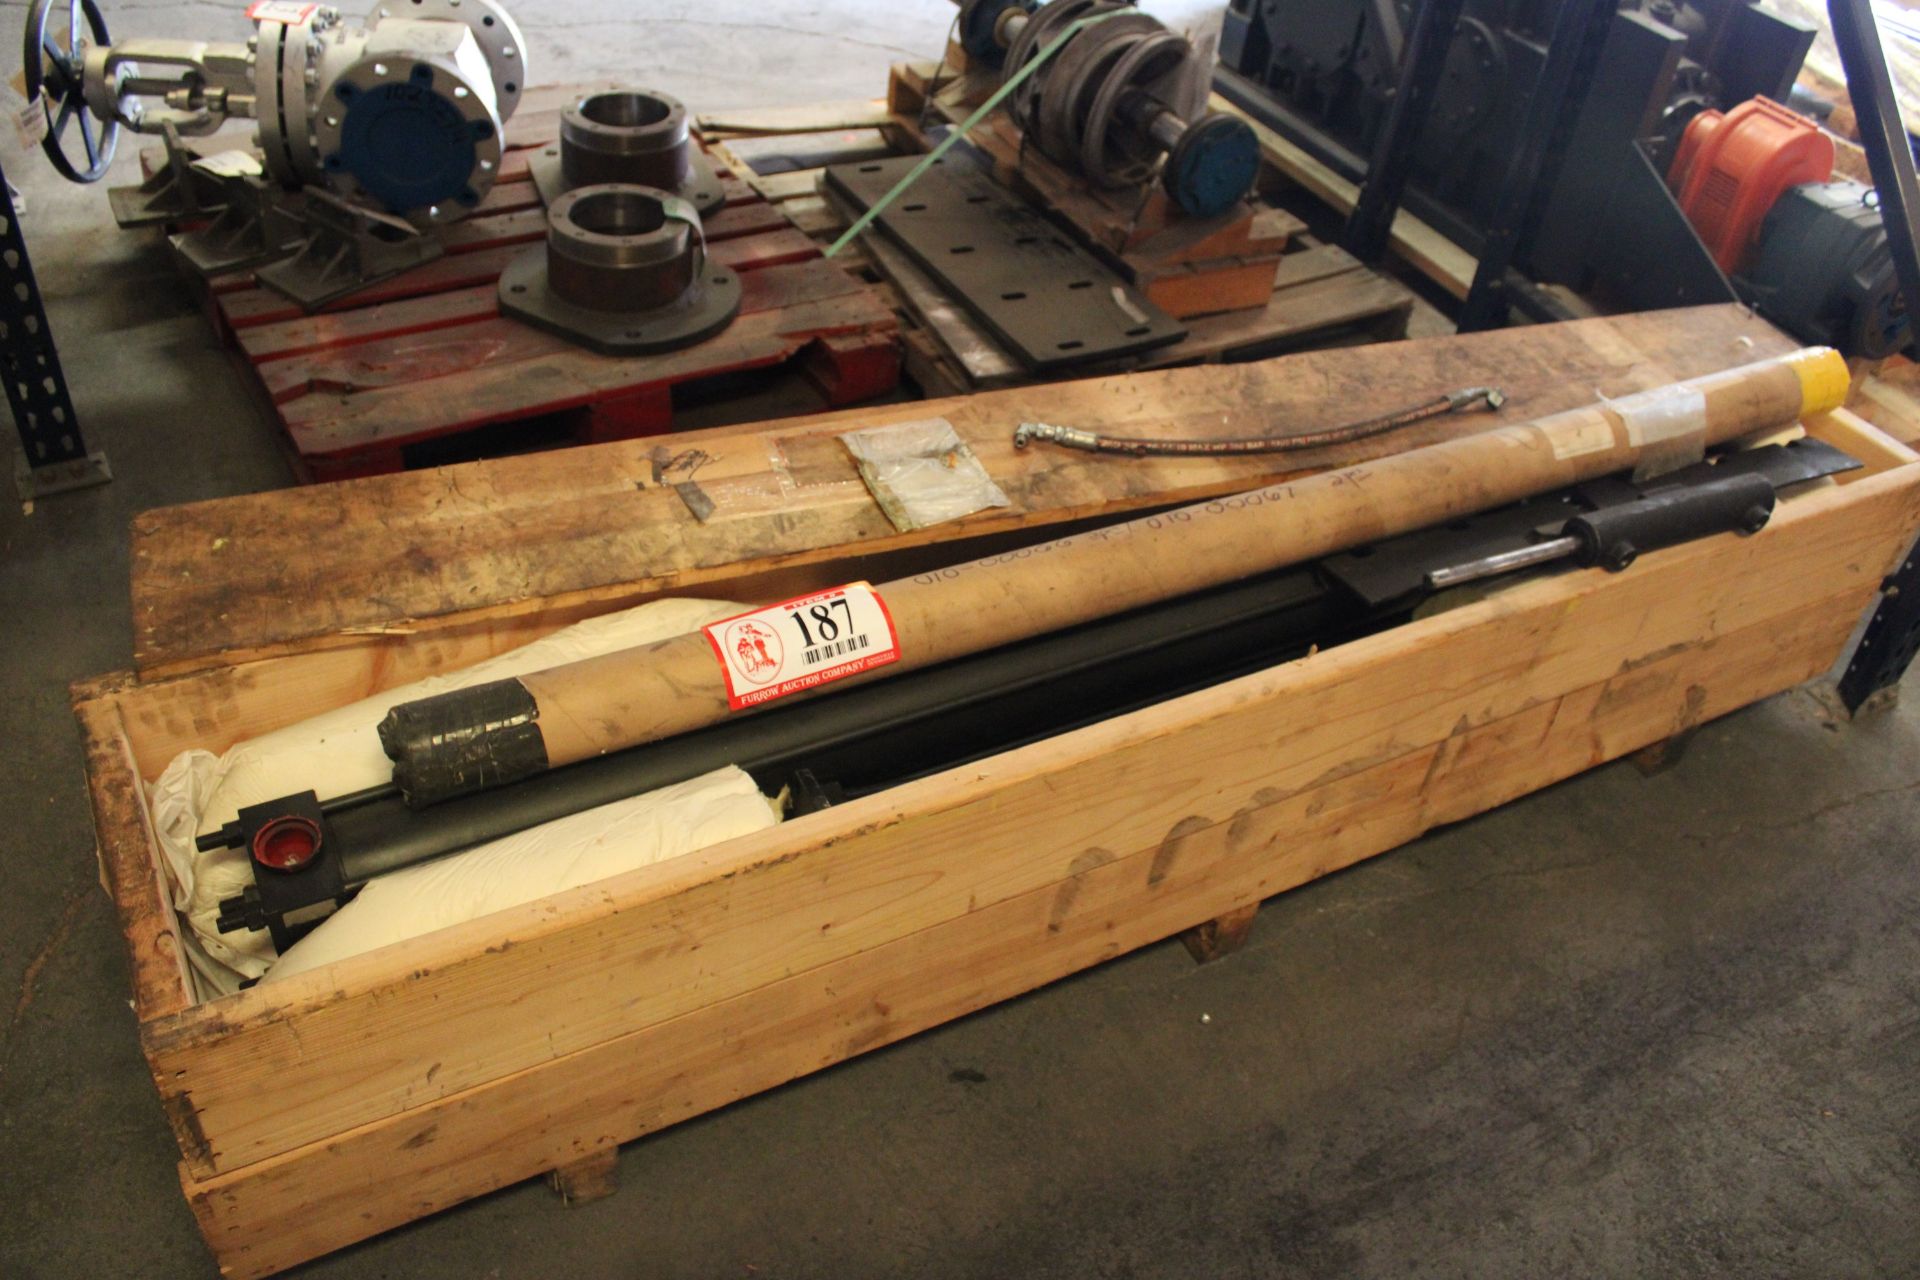 Contents of Crate: (3) Pneumatic Cylinders